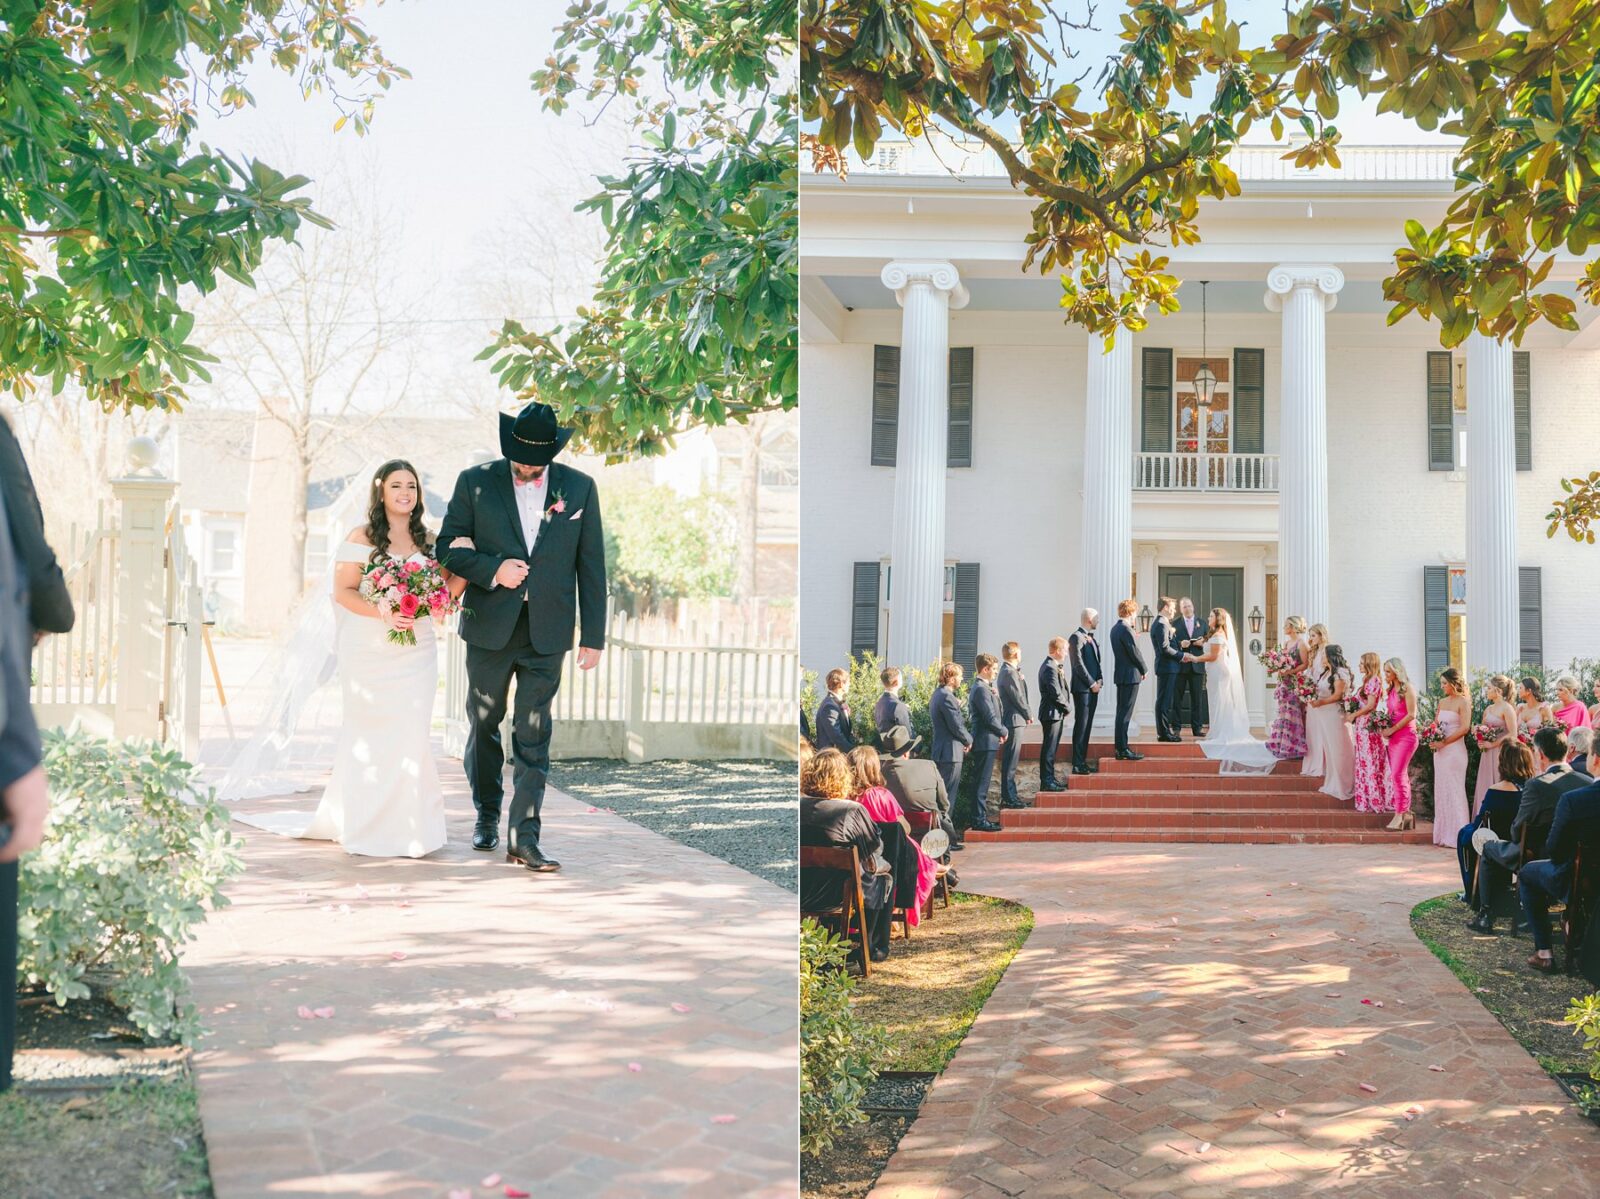 bride and father walking down aisle, wedding in front of woodbine mansion, woodbine mansion porch ceremony space, austin wedding, wedding at Woodbine mansion in round rock texas, wedding photos by austin wedding photography Tara Lyons Photography, planning by The event shop